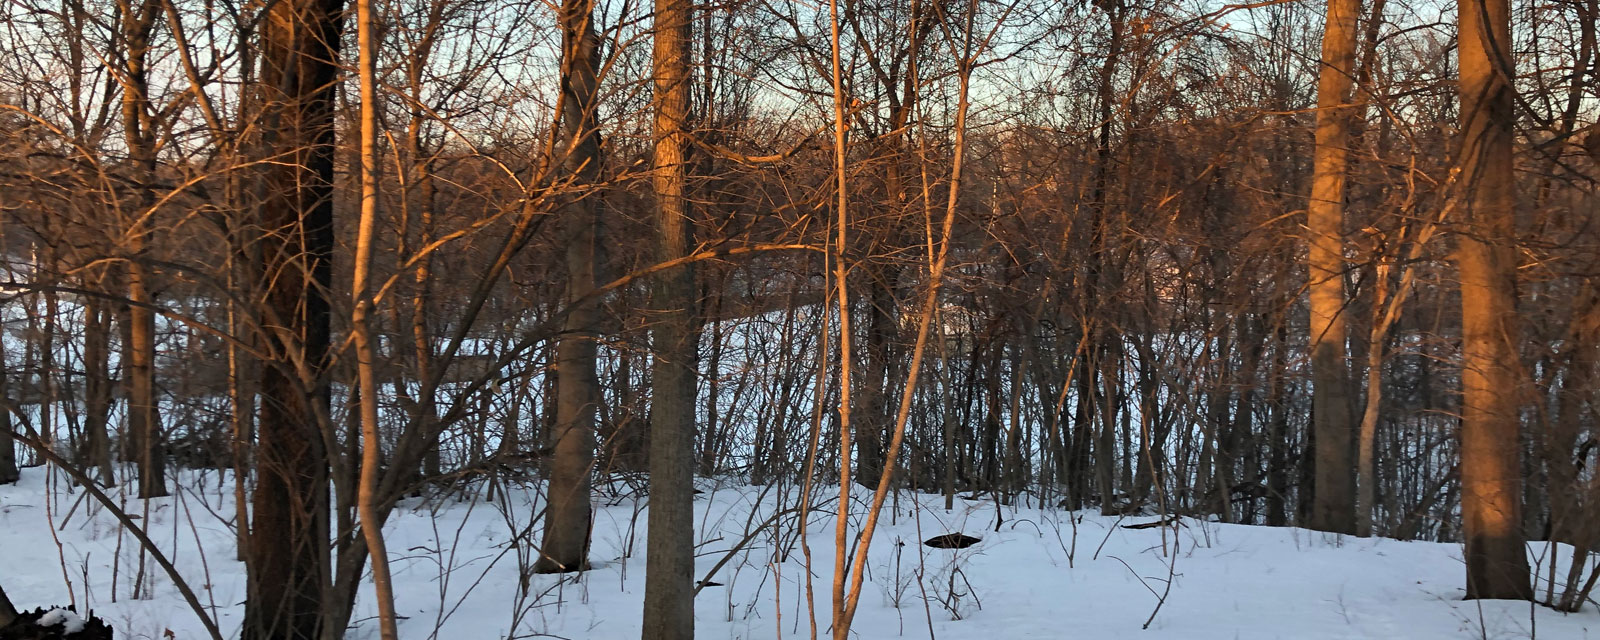 Banner photo showing trees in winter